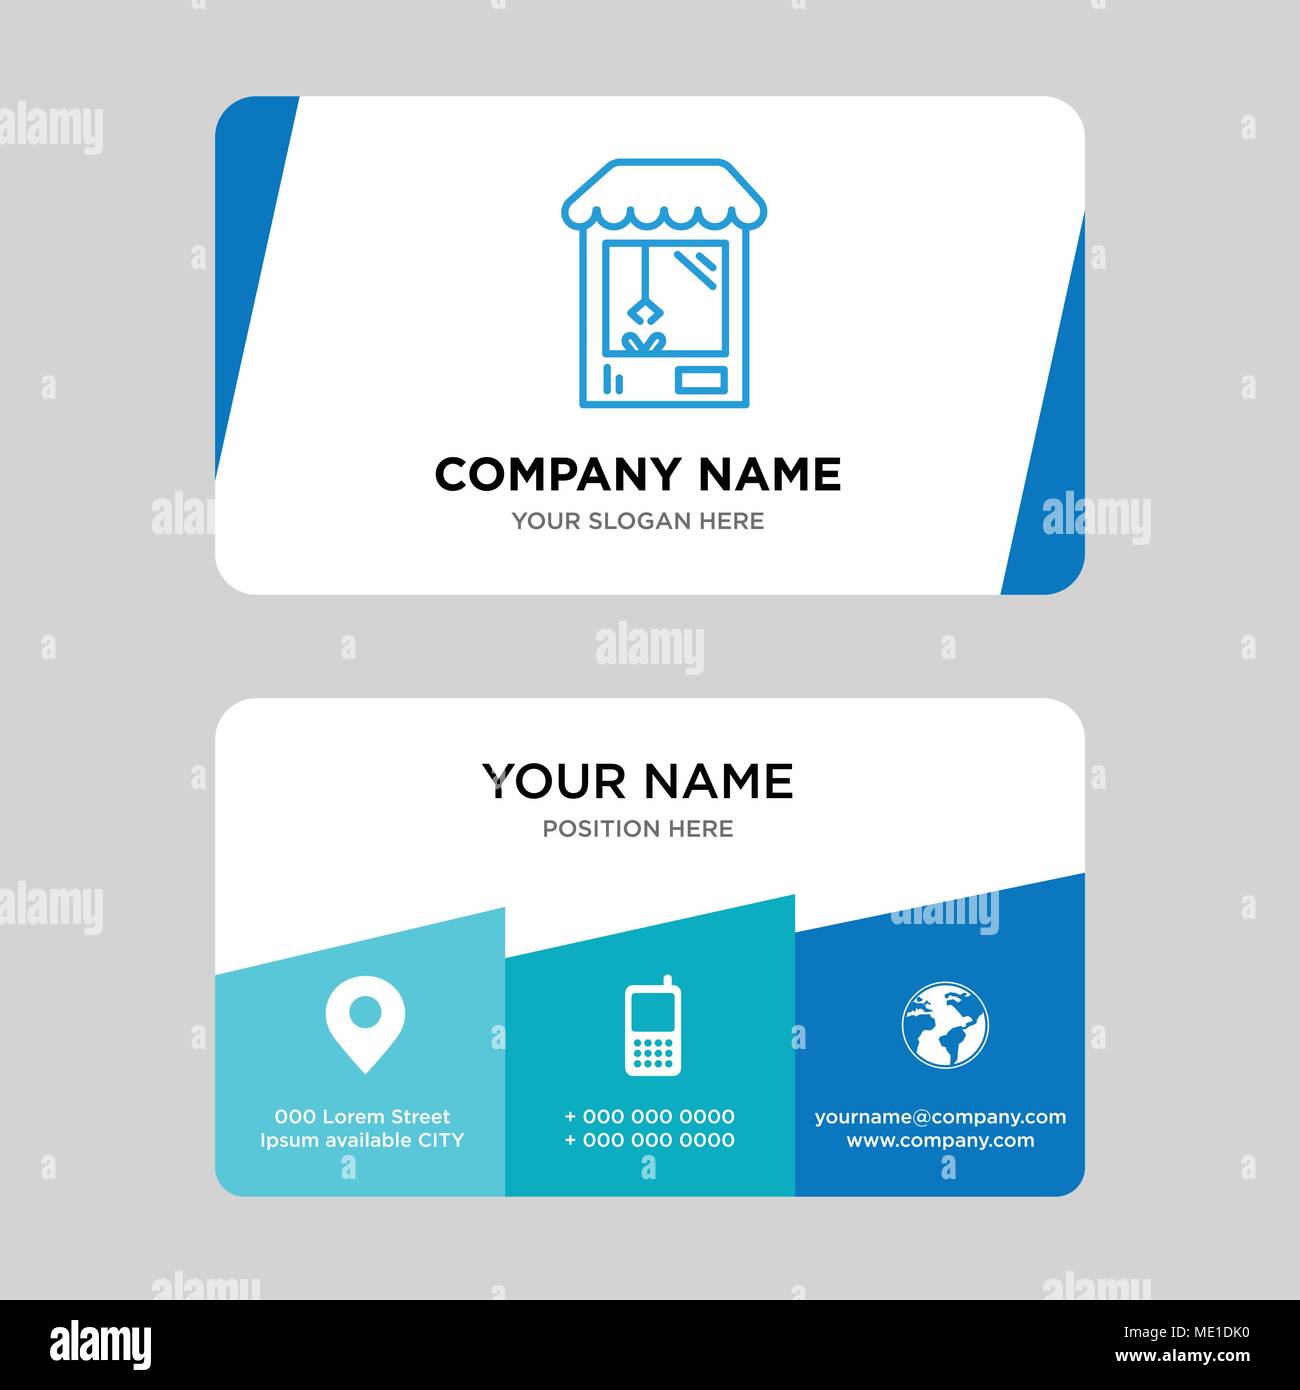 Machine business card design template, Visiting for your company, Modern Creative and Clean identity Card Vector Illustration Stock Vector